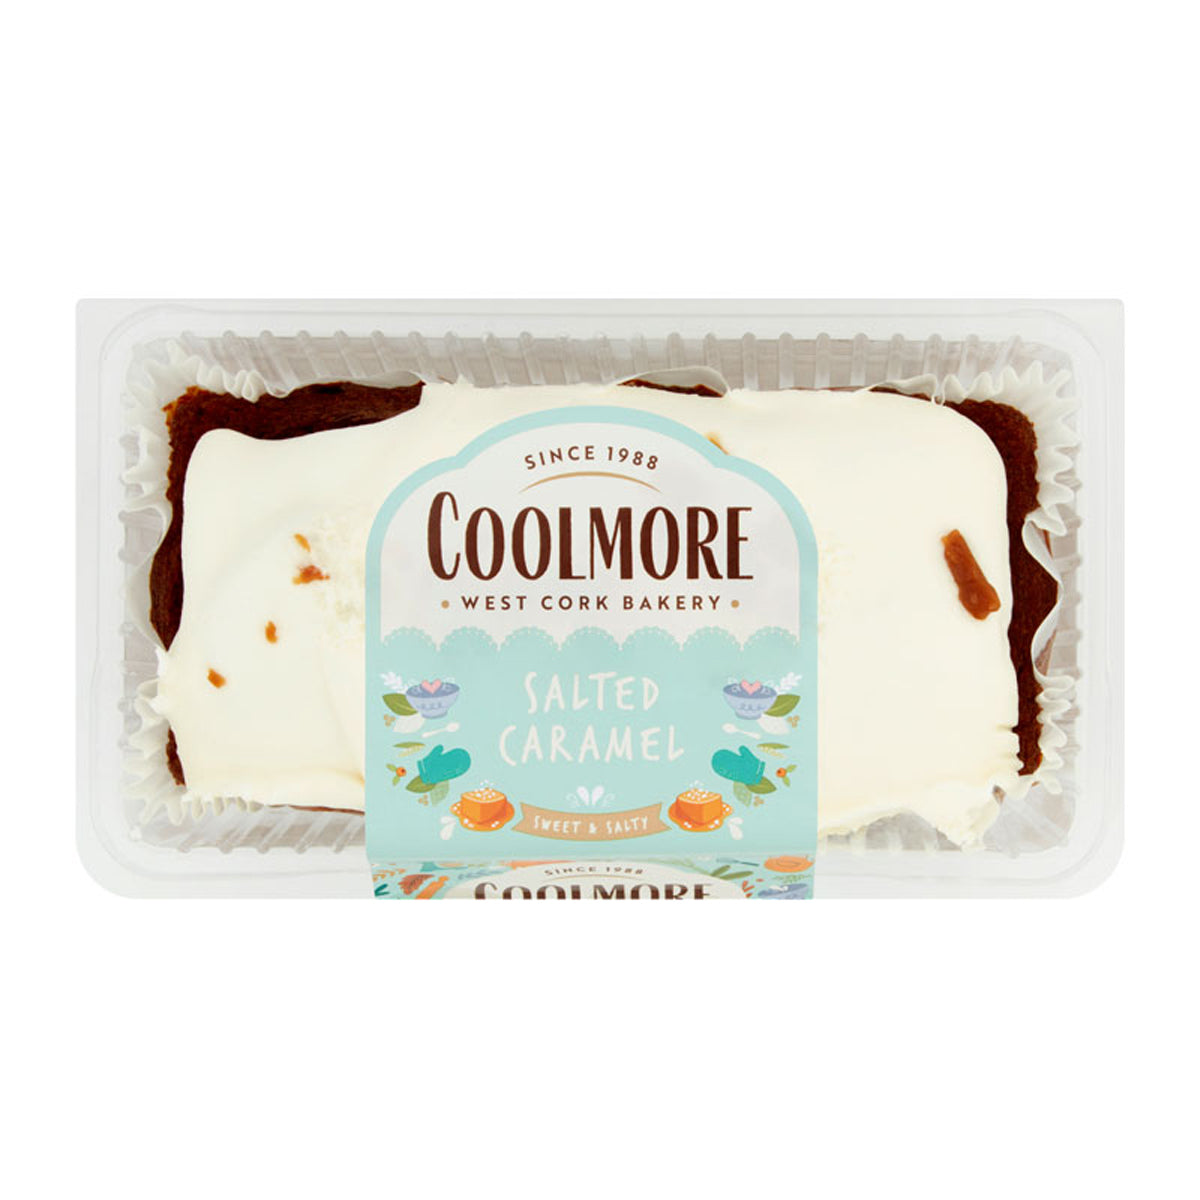 A package of Coolmore - Salted Caramel Cake - 400g in a plastic container.